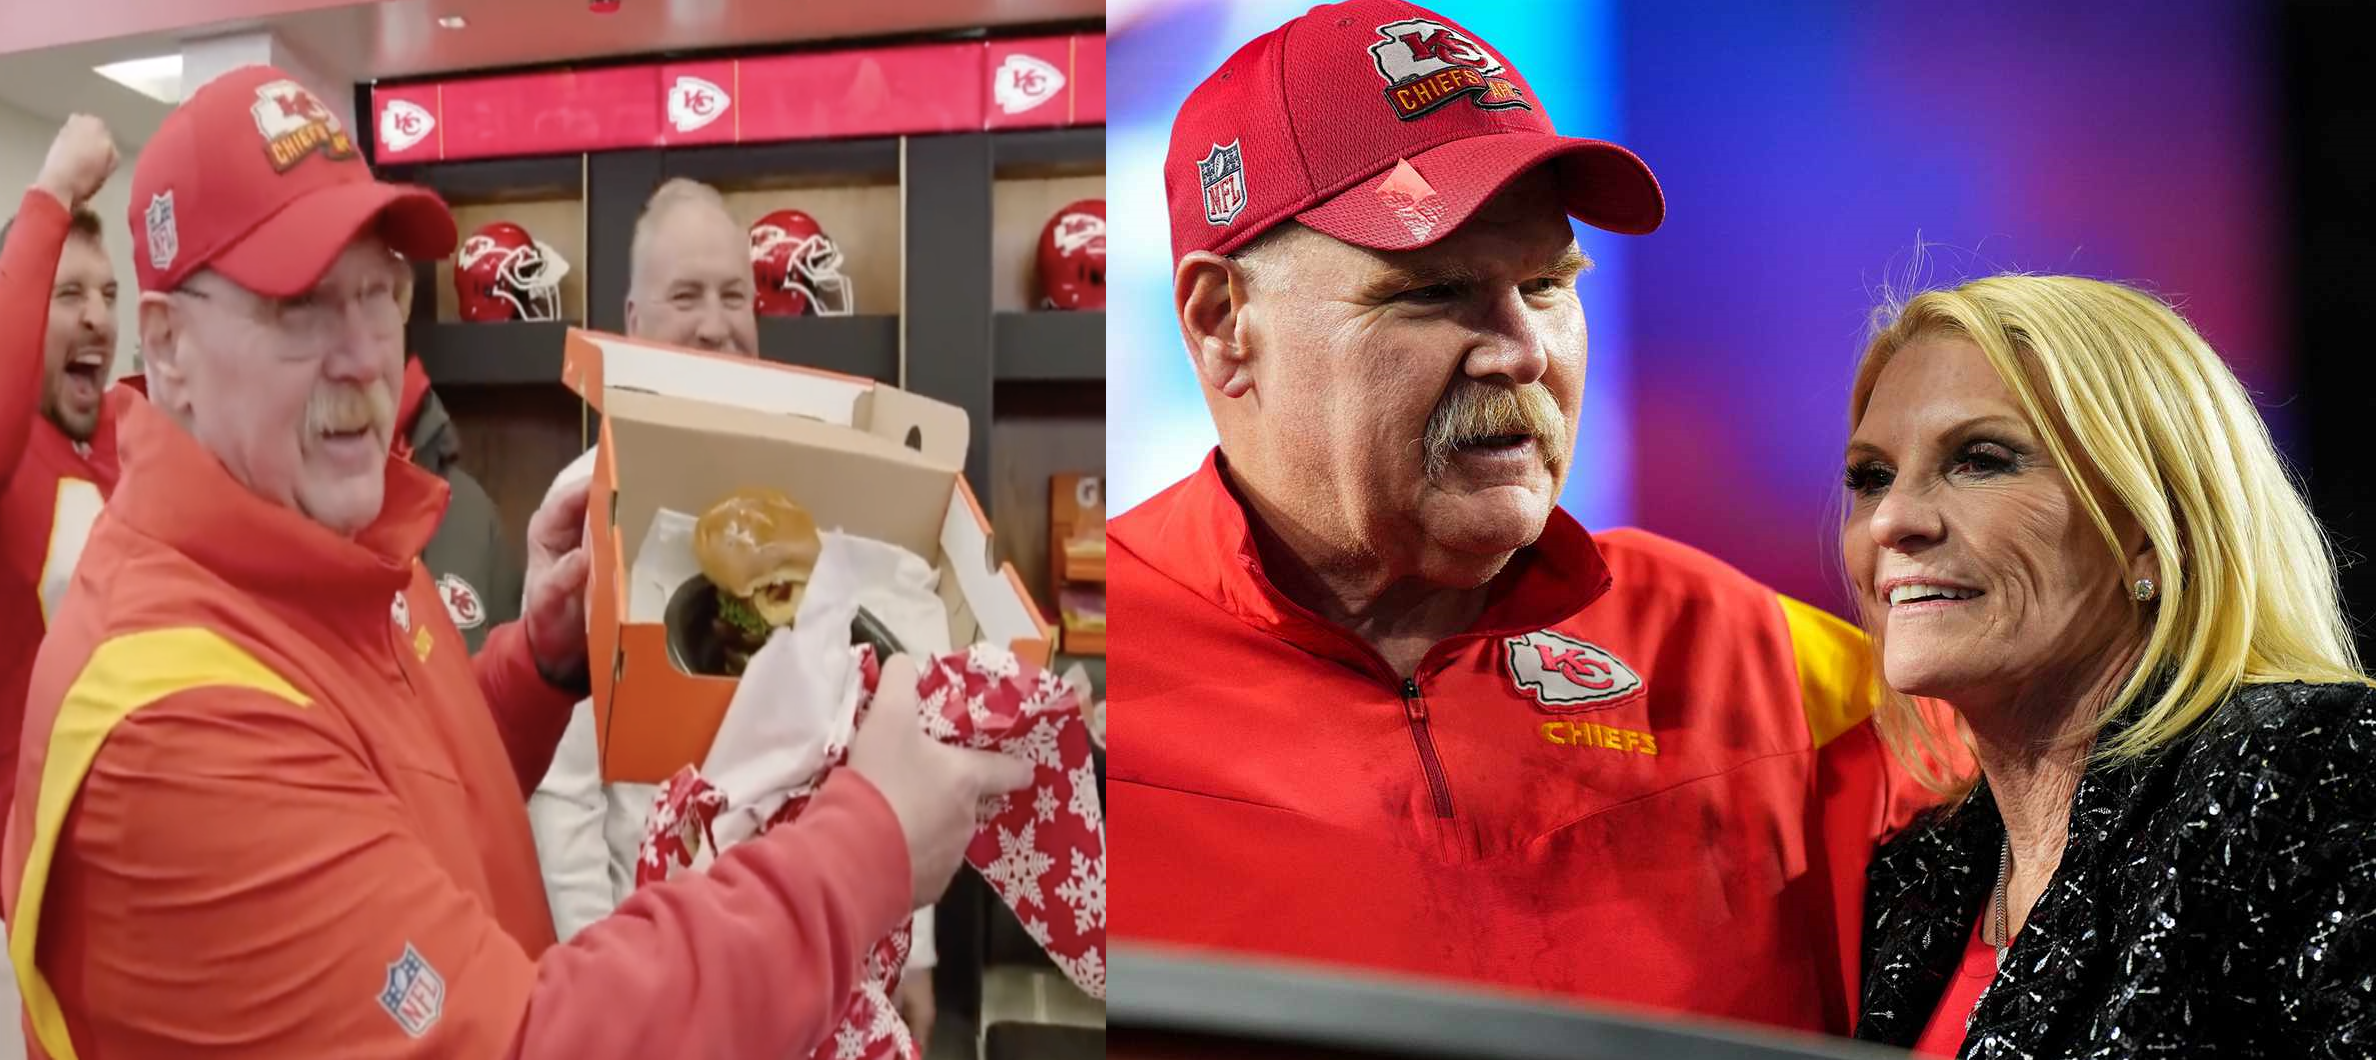 "There's no Christmas without her." Just before Christmas, Chiefs HC Andy Reid pleasantly surprises his beloved wife with charming gifts.